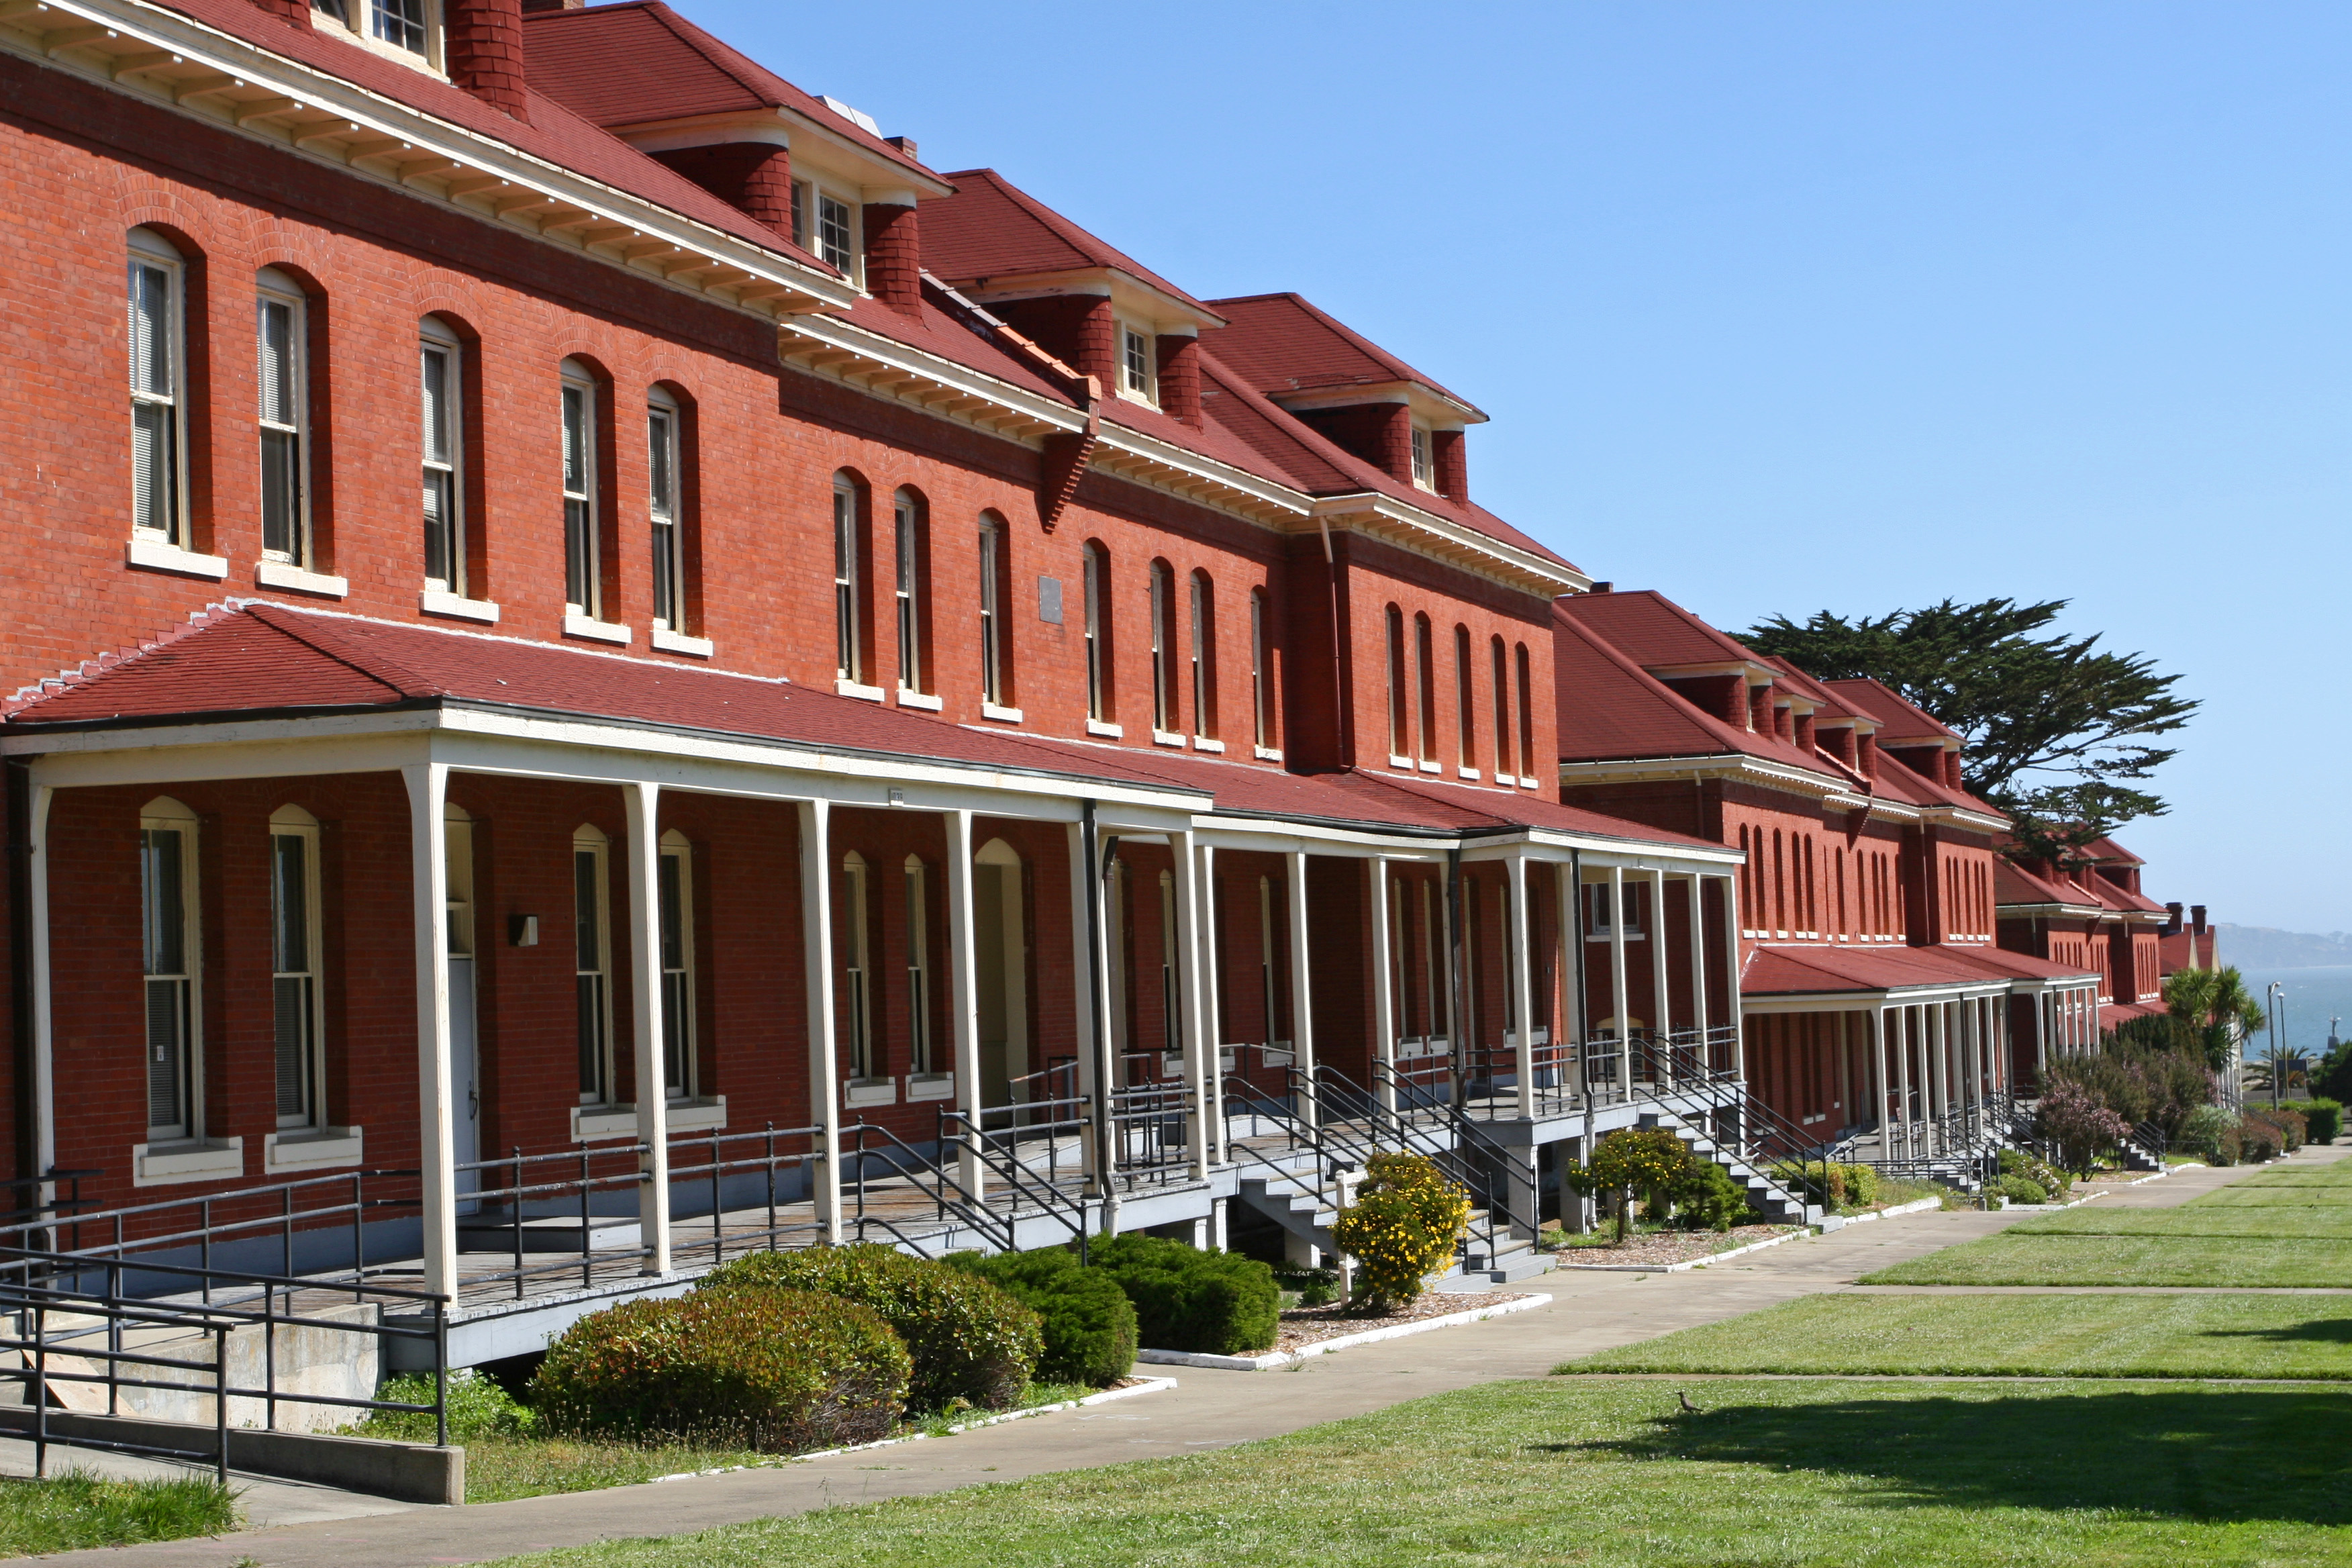 Row of red brick barracks with white-columned porches where infantry soldiers lived.